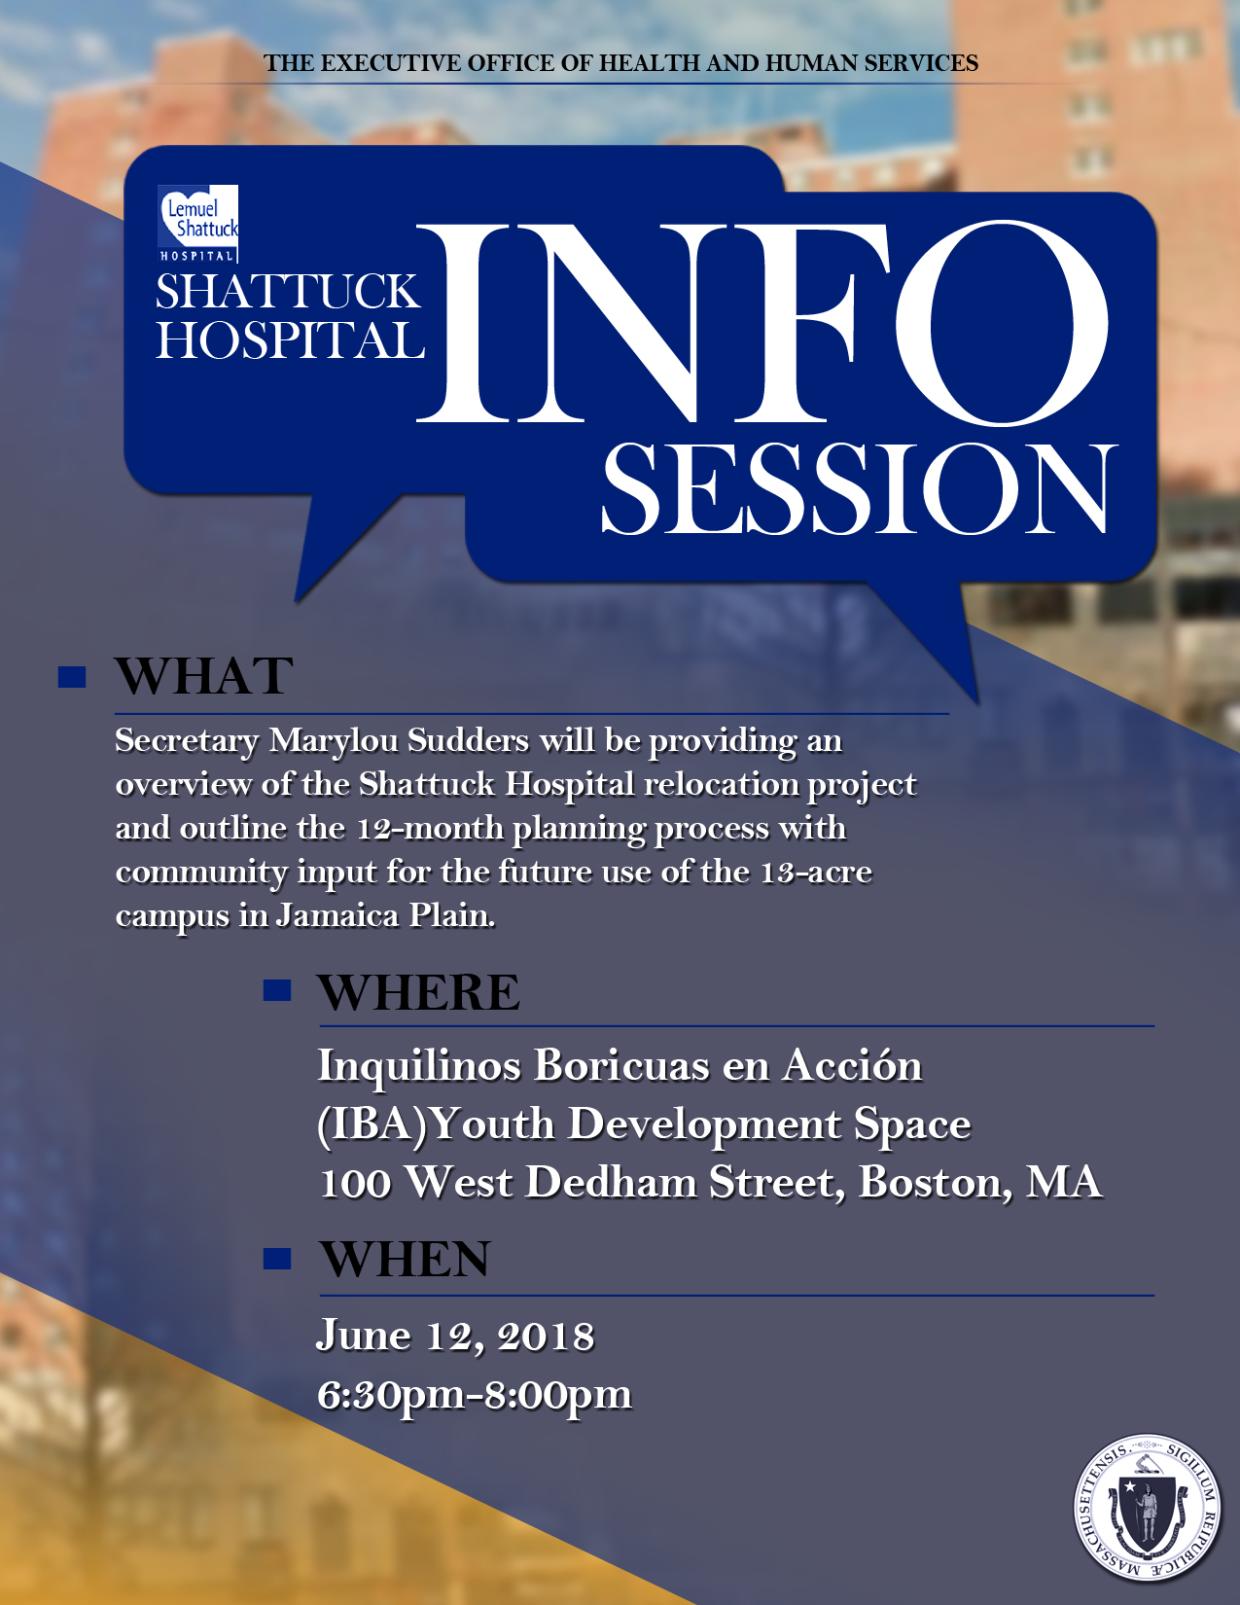 "Shattuck Hospital Info Session. What: Secretary Marylou Sudders will be providing an overview of the Shattuck Hospital relocation project and outline the 12-month planning process with community input for the future use of the 13-acre campus in Jamaica Plain. Where: Inquilinos Boricuas en Acción (IBA) Youth Development Space, 100 West Dedham Street, Boston, MA. When: June 12, 2018, 6:30pm-8:00pm